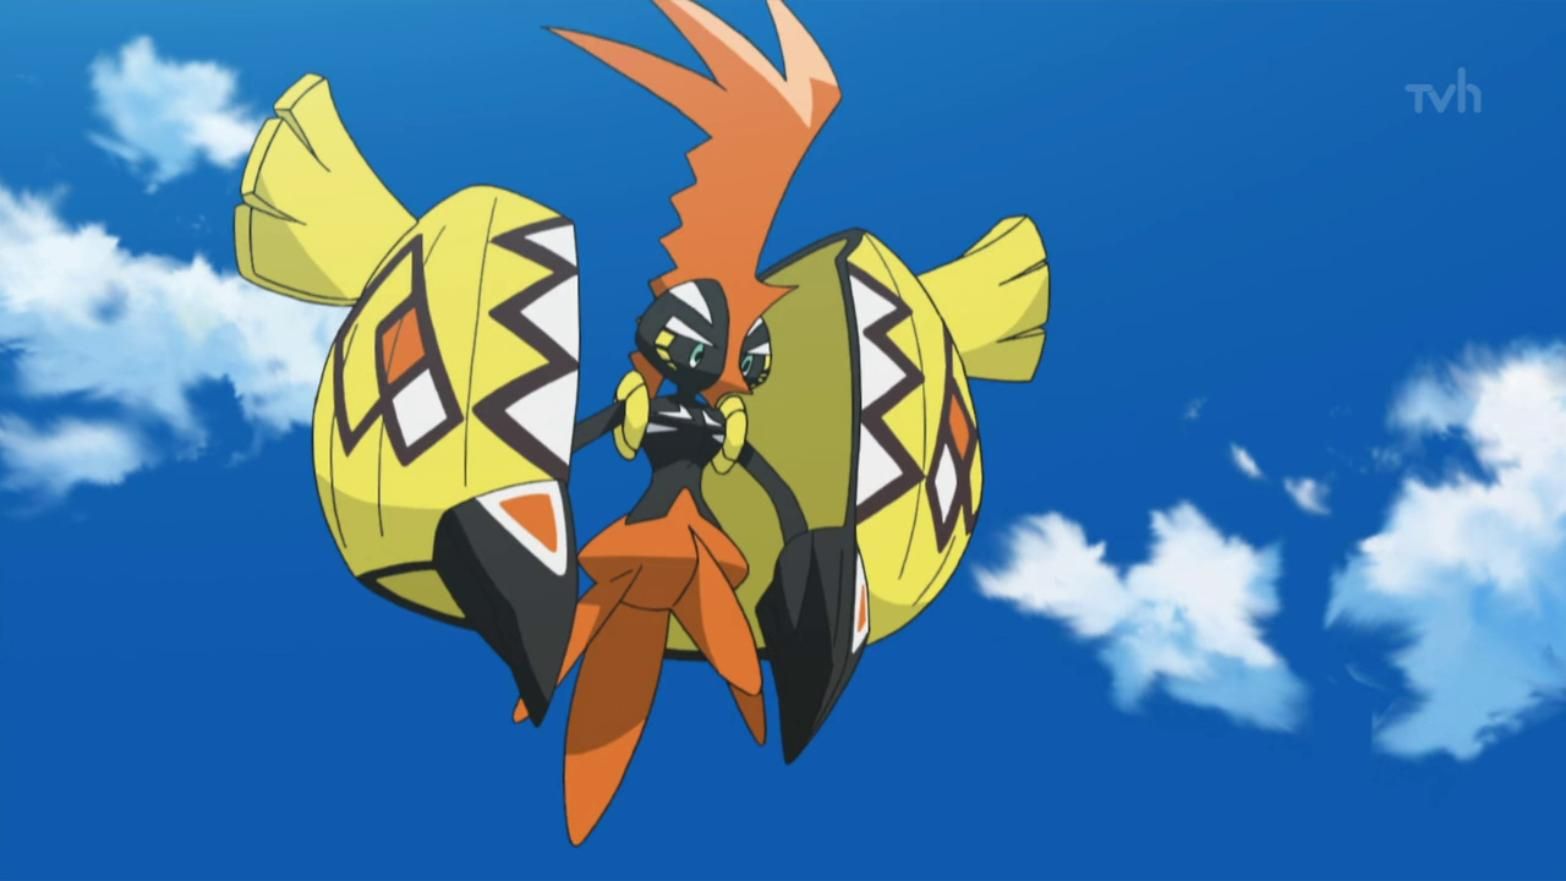 Pokemon Go Tapu Bulu Raid Guide: Best Counters, Weaknesses and